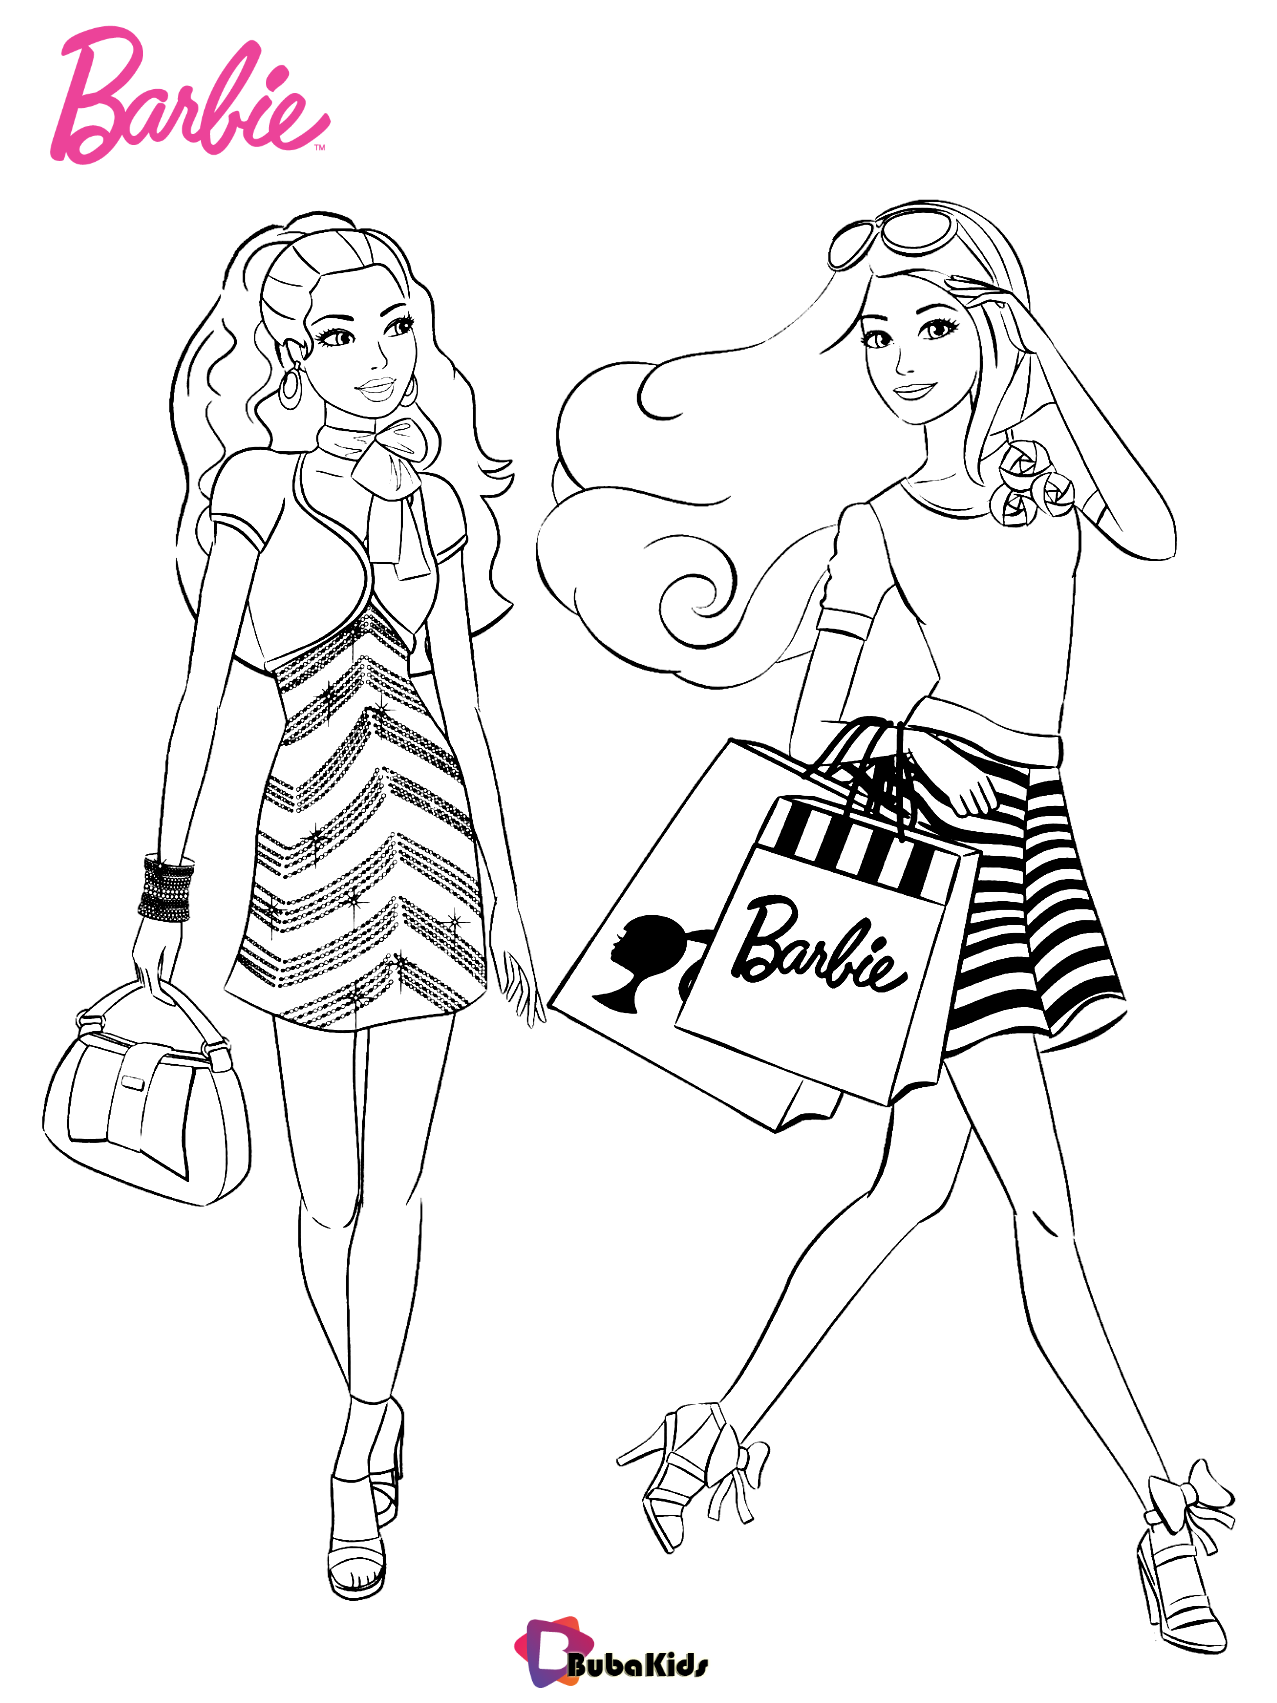 Beautiful Barbie coloring pages for preschool, kindergarten and elementary school children to print and color Wallpaper